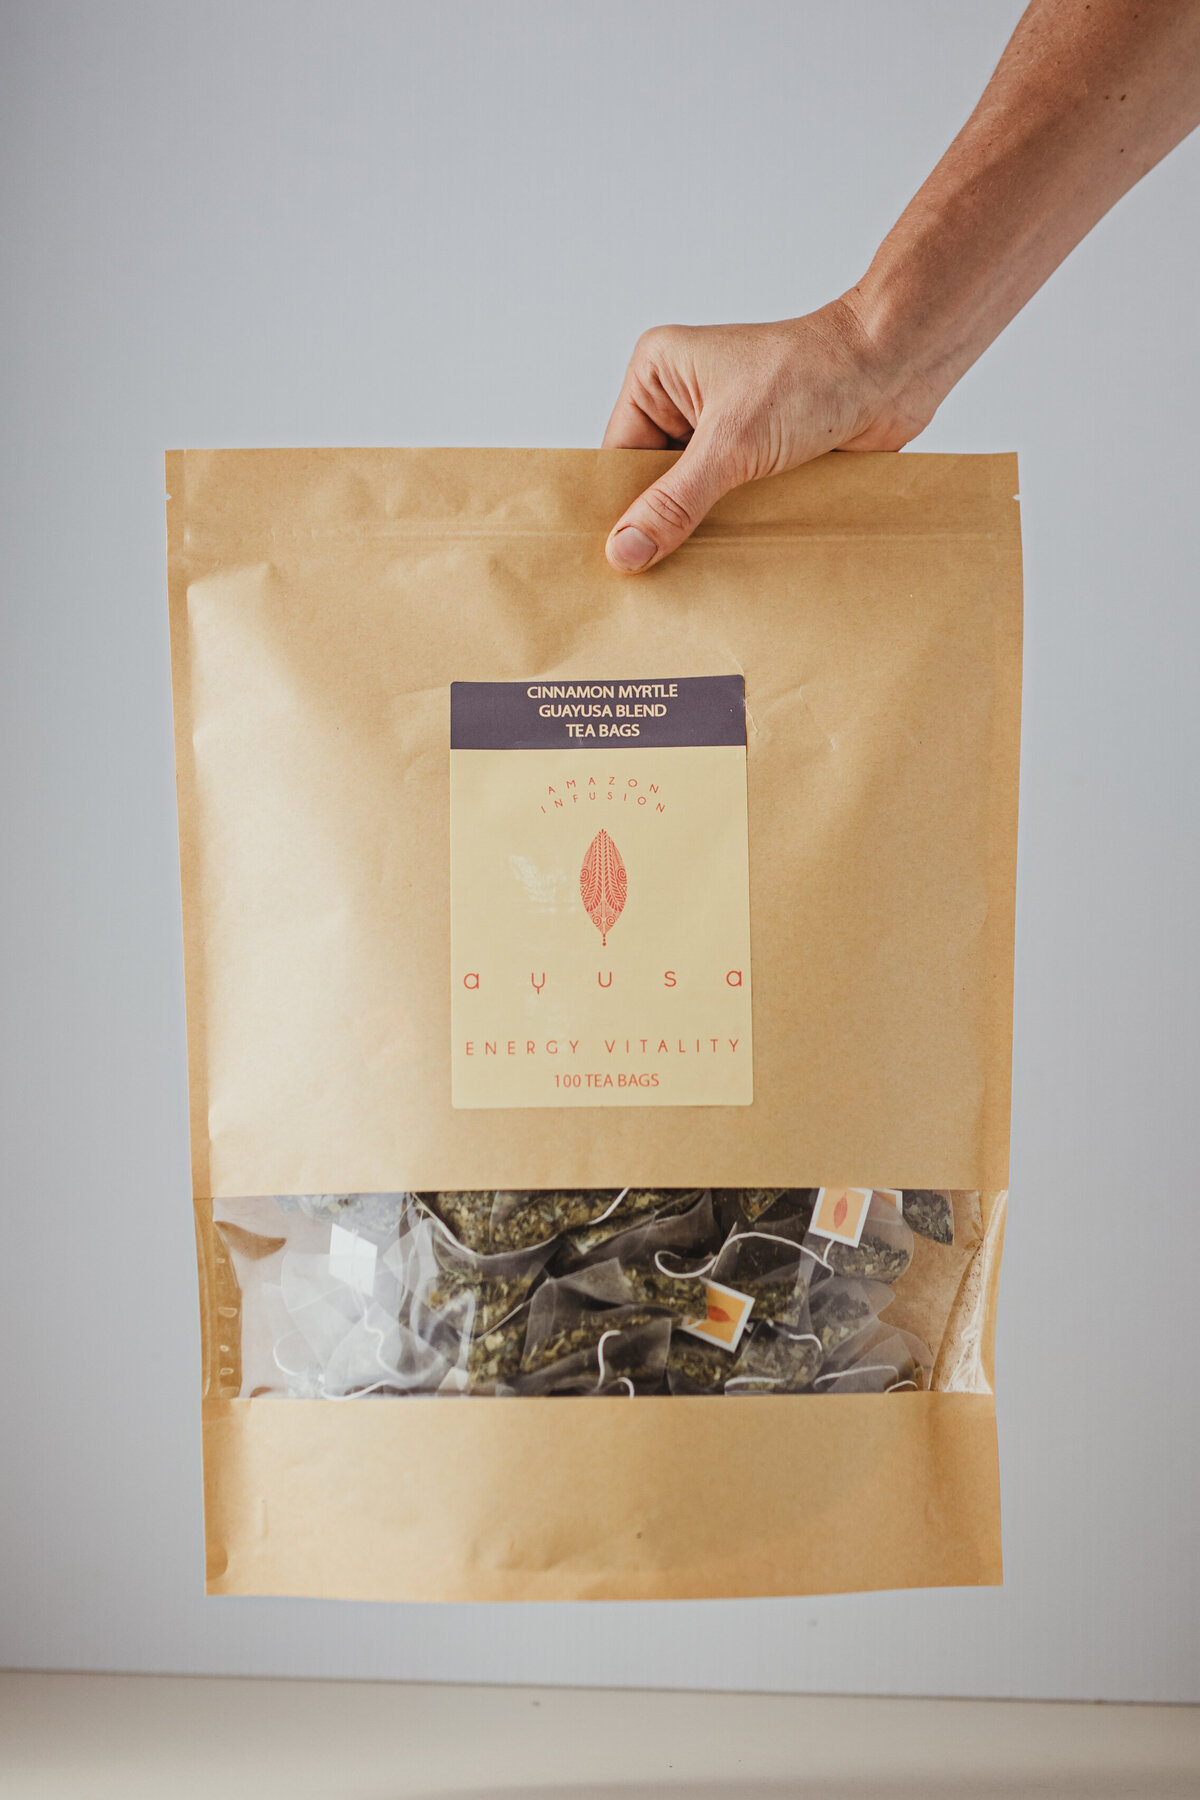 Studio photoshoot featuring a large pack of tea bags